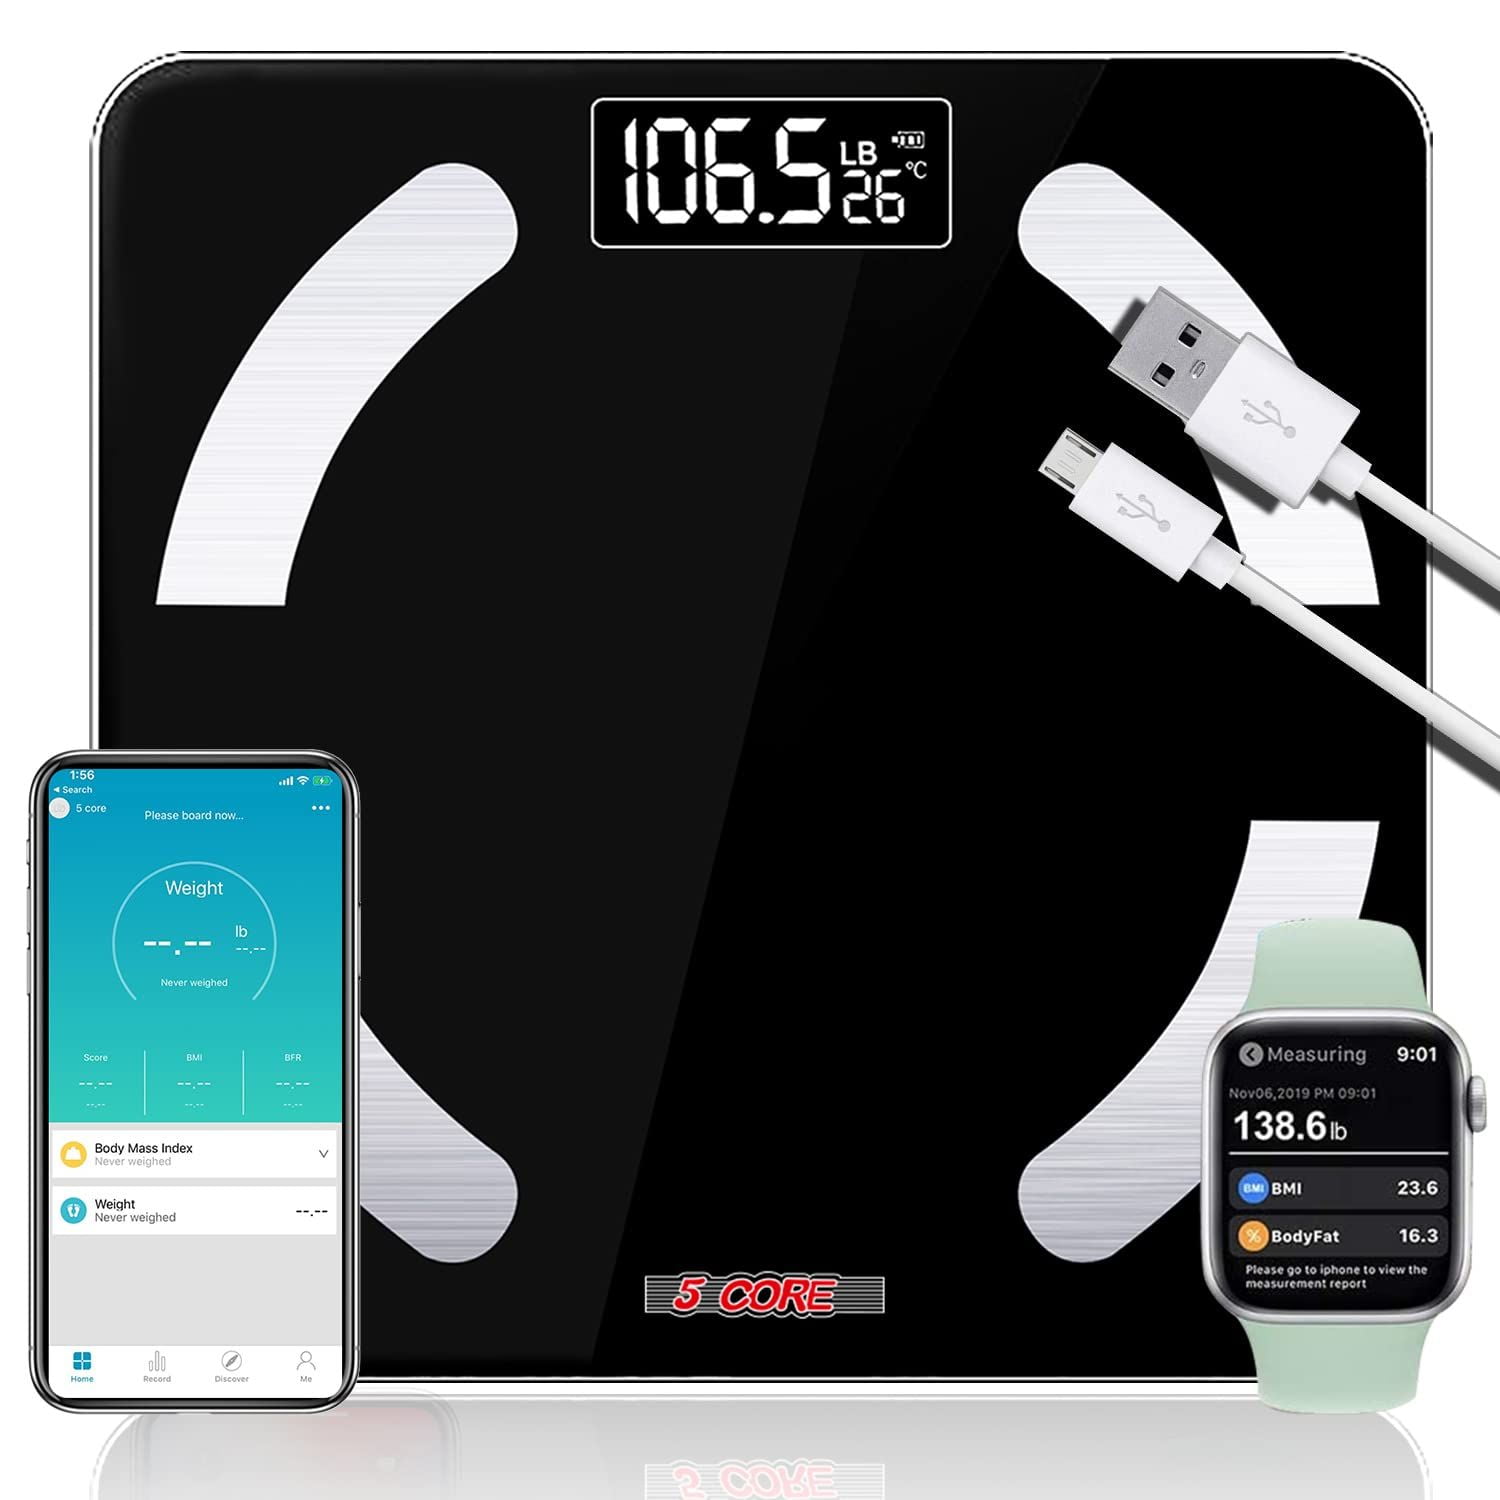 5 Core Smart Digital Bathroom Weighing Scale with Body Fat and Water Weight  for People, Bluetooth BMI Electronic Body Analyzer Machine, 400 lbs. BBS VL  B BLU 